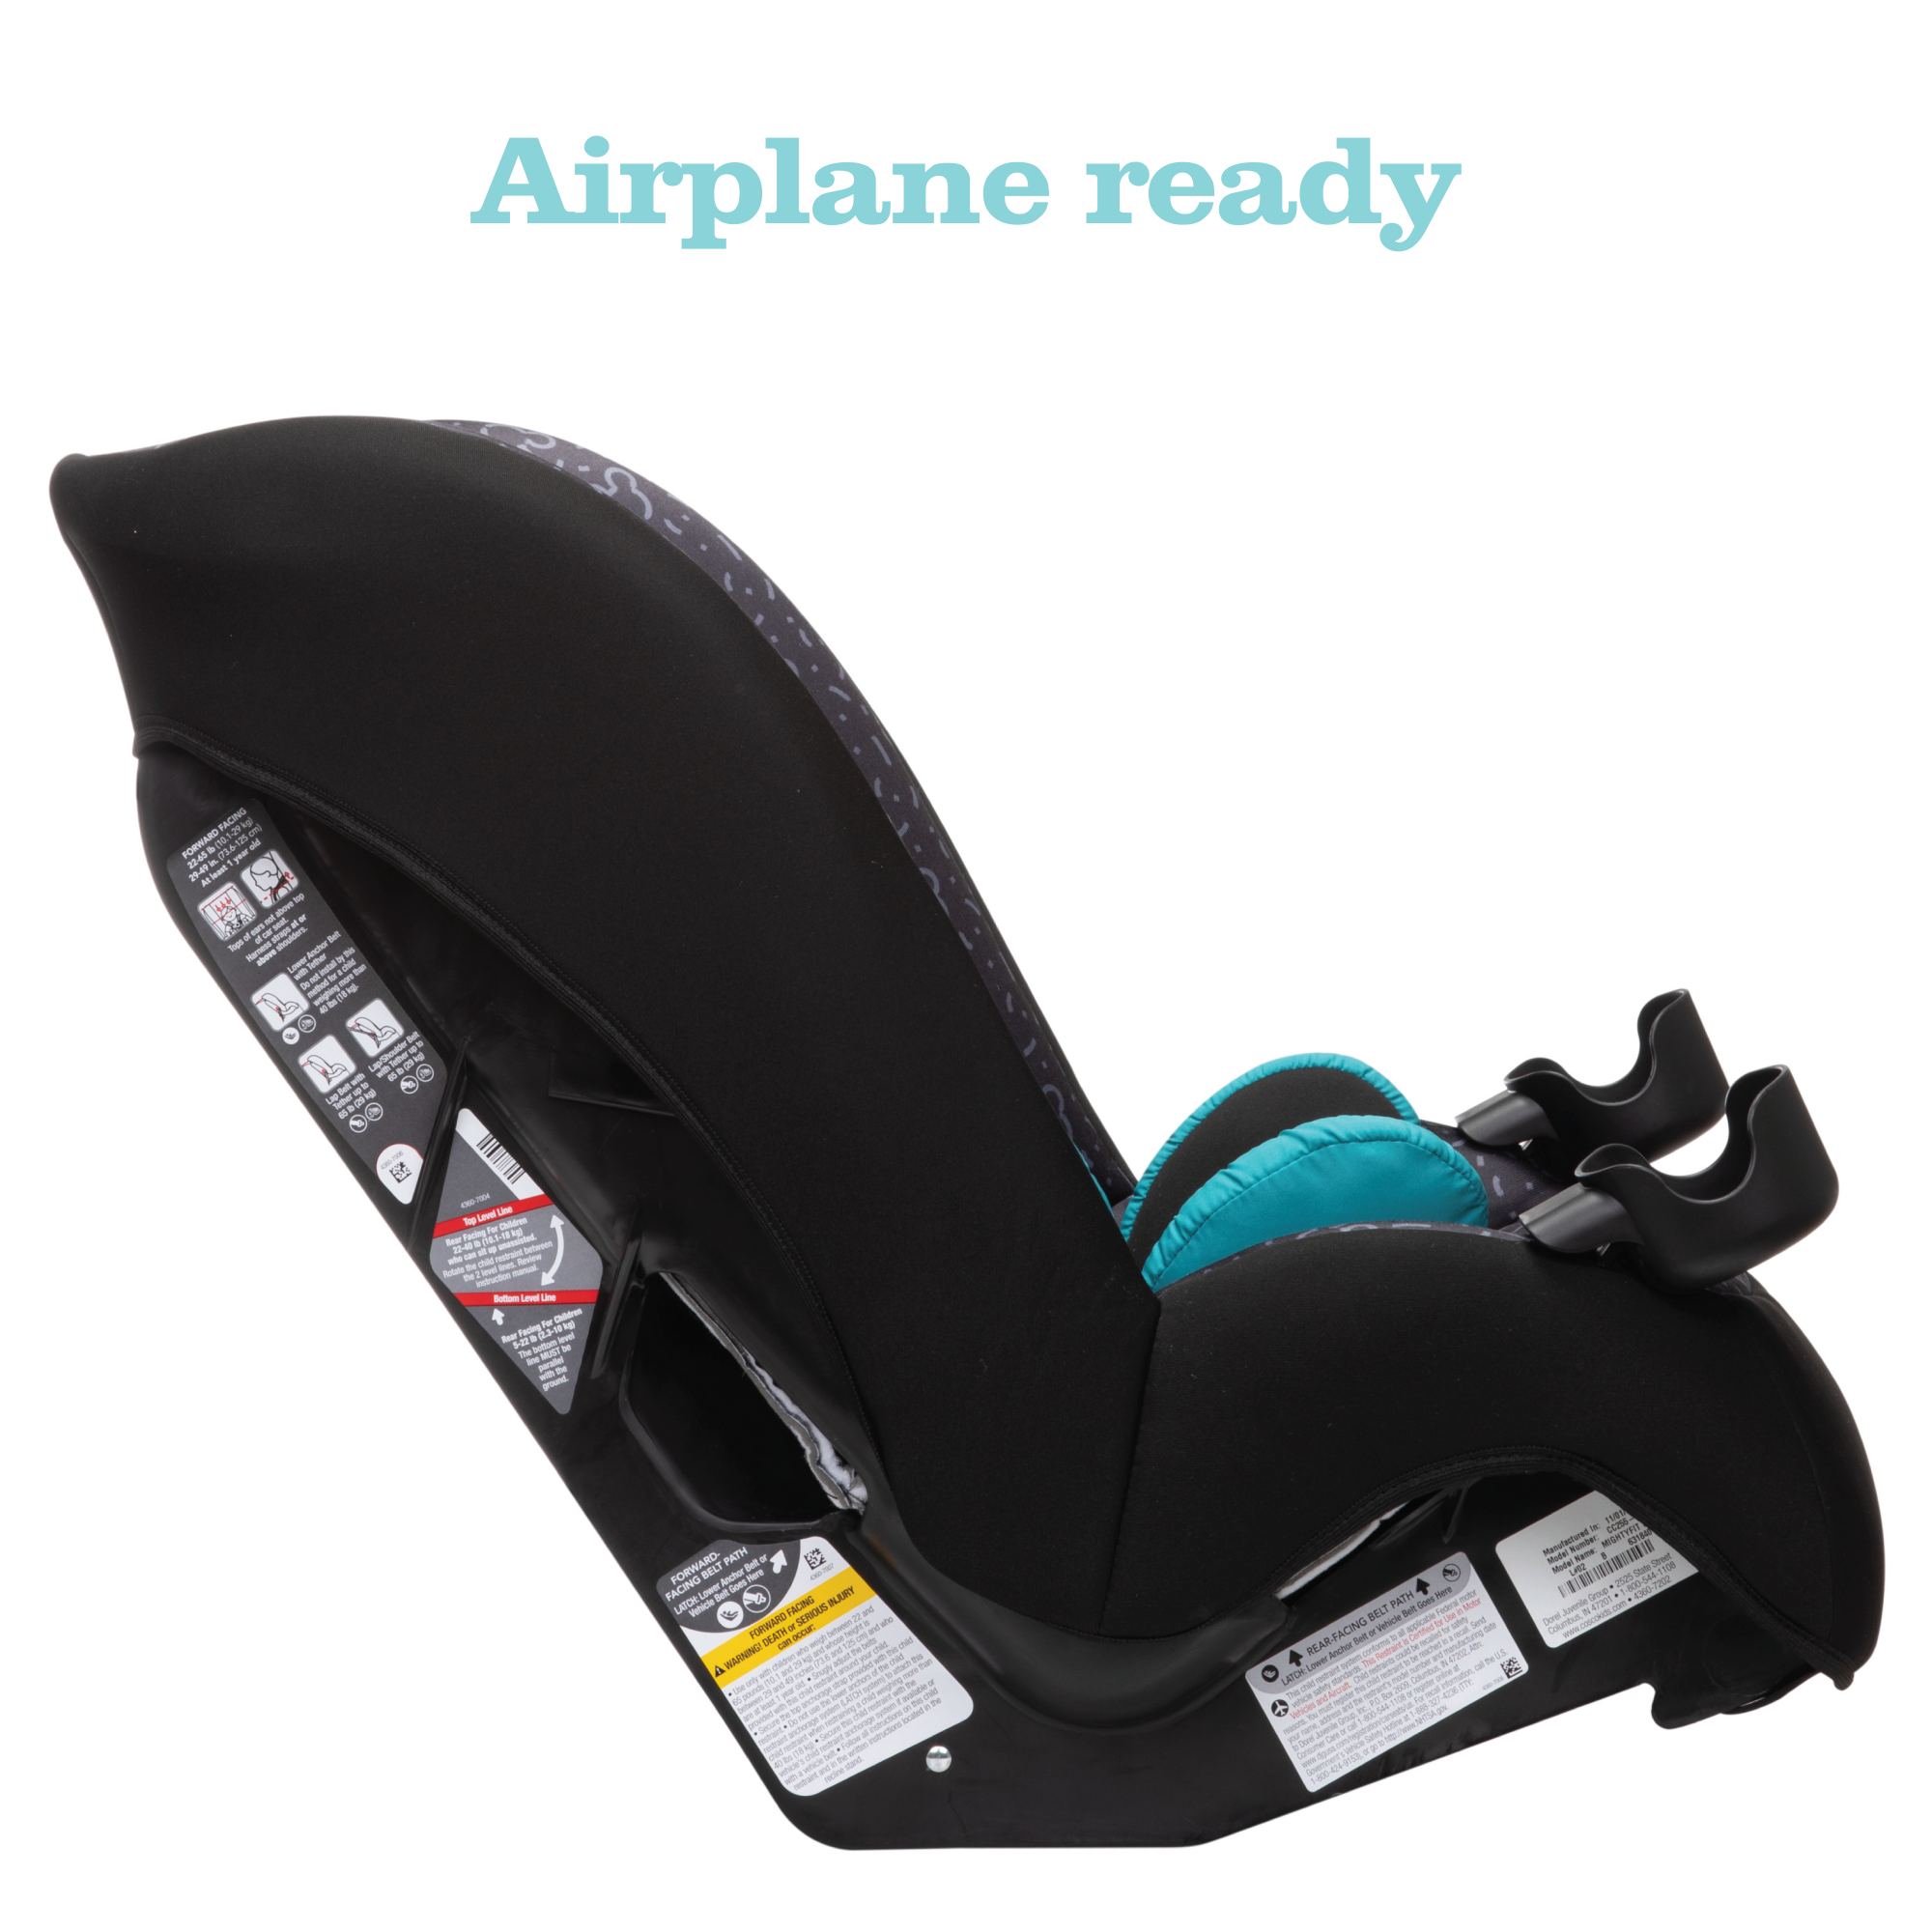 Disney Baby Jive 2-in-1 Convertible Car Seat - airplane ready